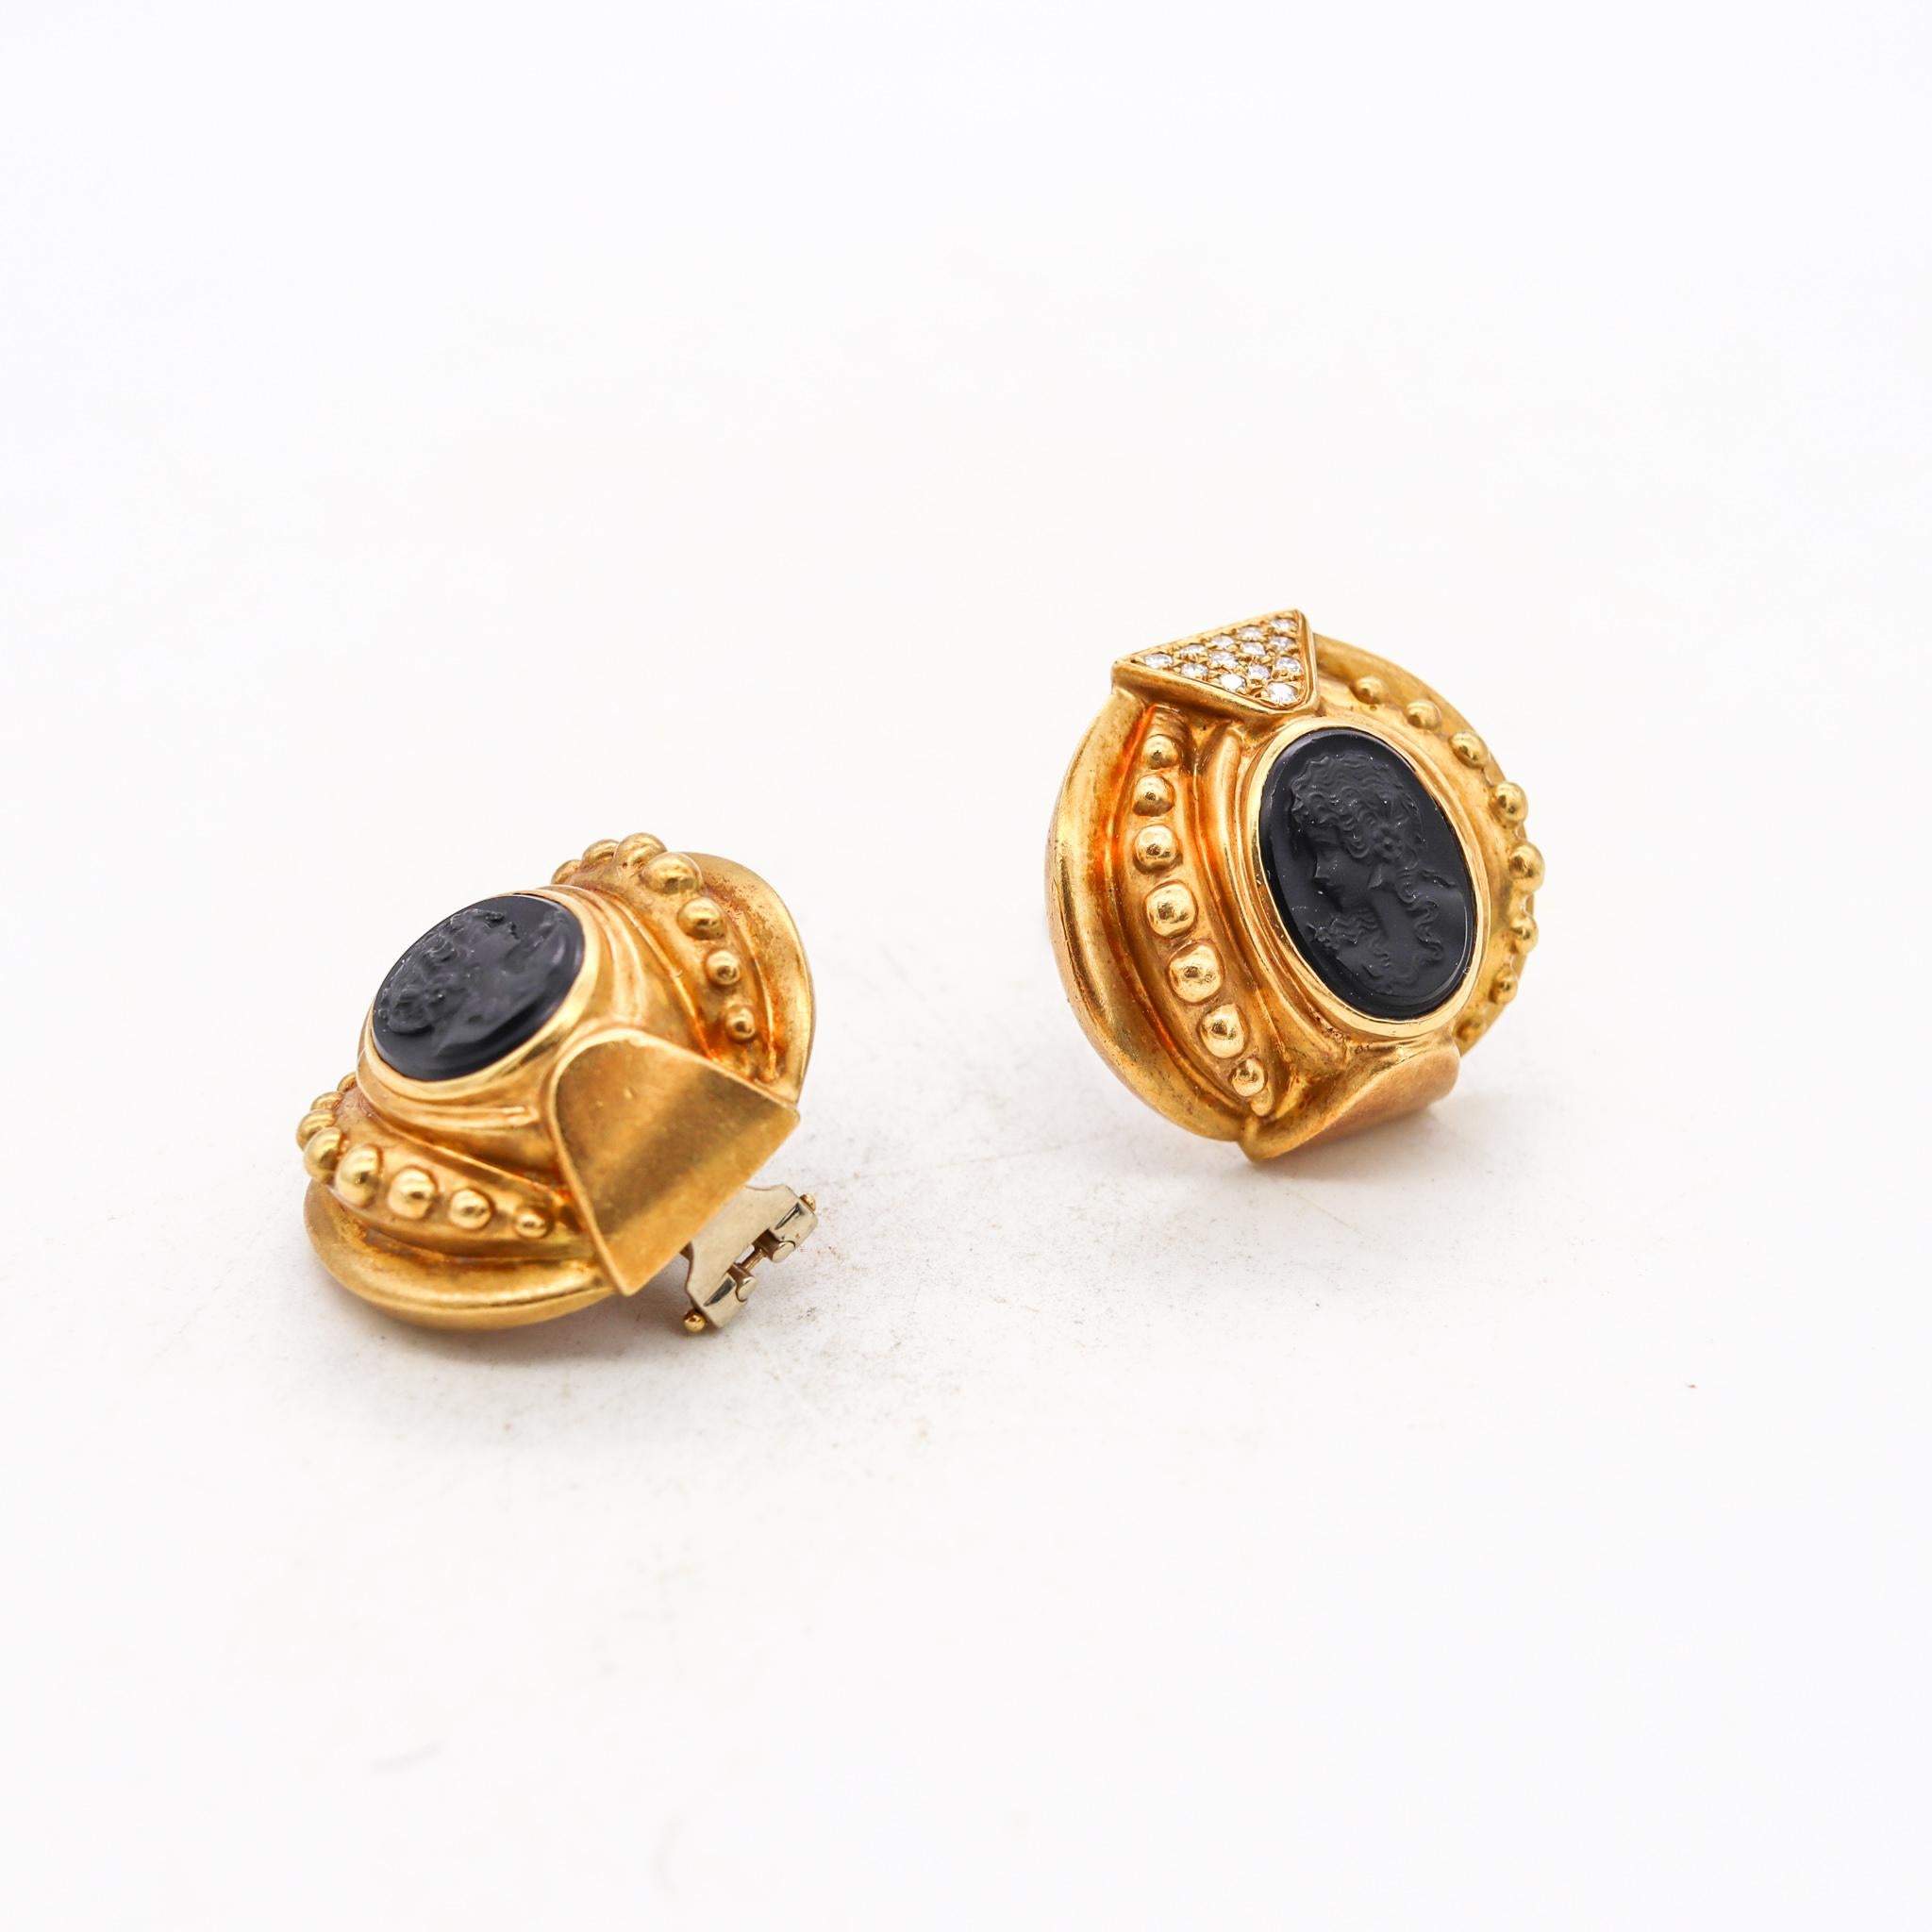 Etruscan Revival Earrings in 18Kt Gold with 9.78 Cts in Diamonds and Carved Onyx In Excellent Condition For Sale In Miami, FL